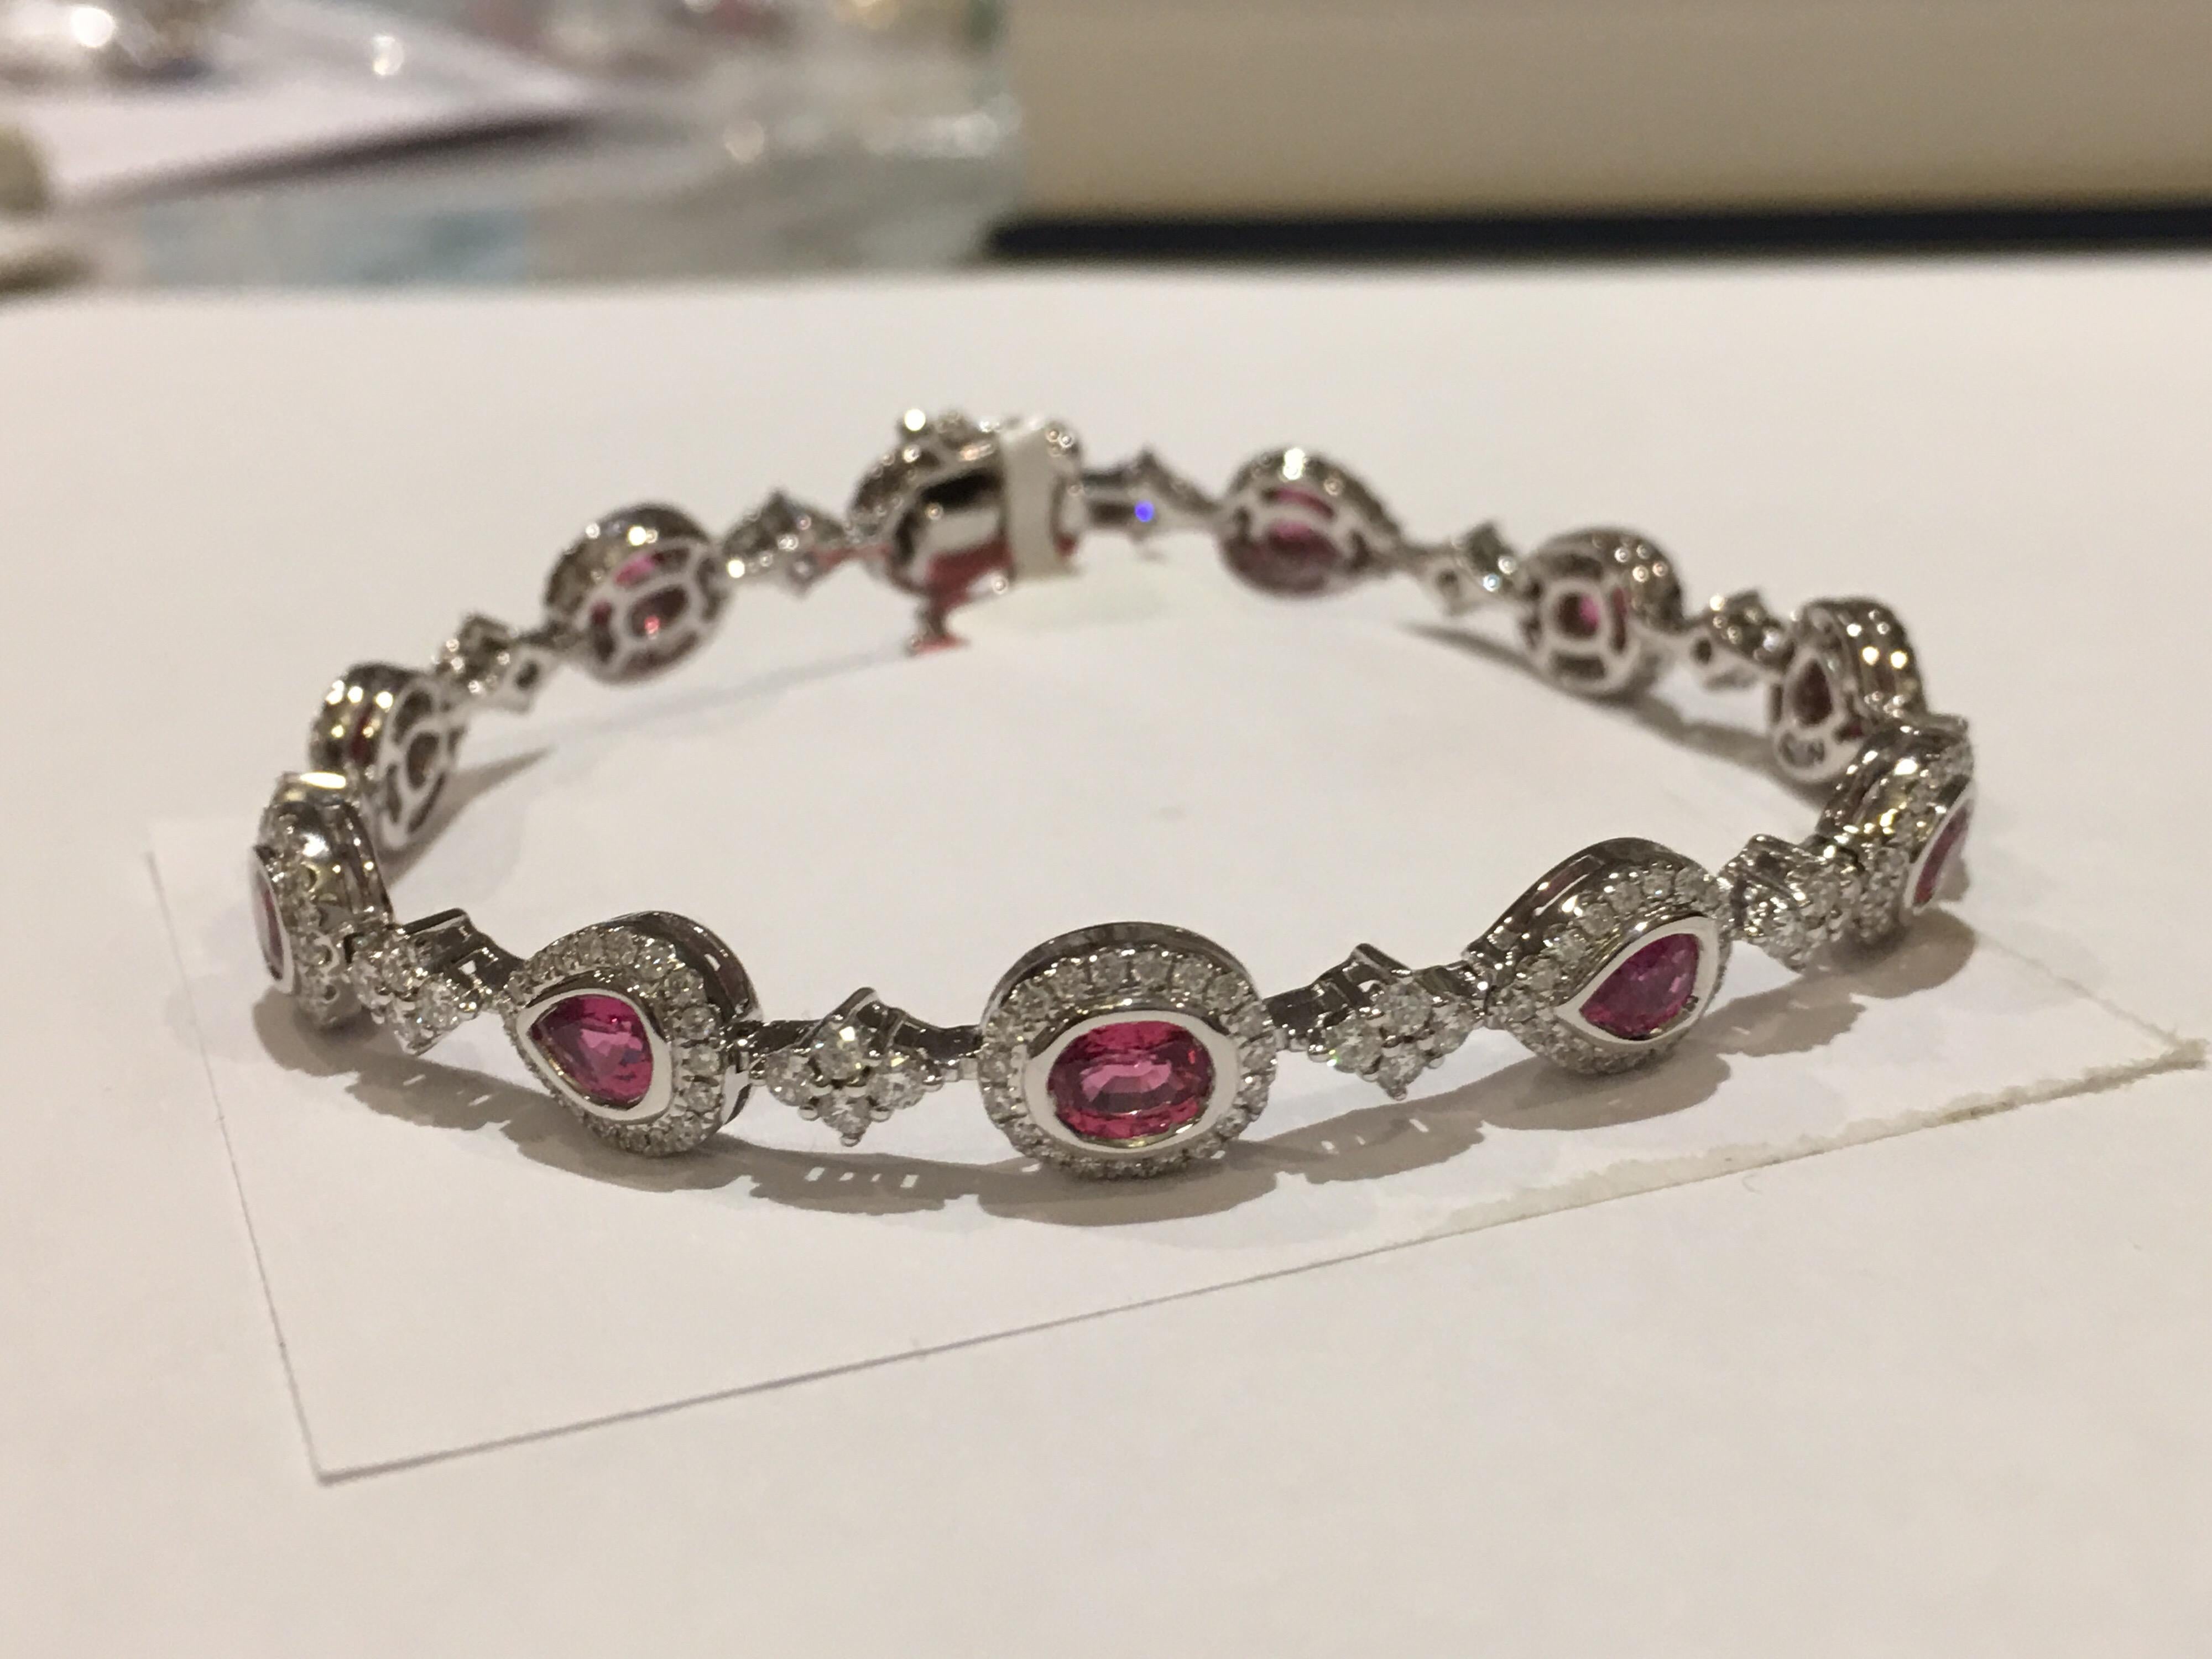 Natural Padparadscha Sapphire set in 14K White Gold. Total 5.10 Carat Padpardscha is IGL Certified  stones.
Round white diamonds 2.04 Carat is VS quality D /E Color.
One of a kind hand crafted Bracelet is 7 Inches Long.

